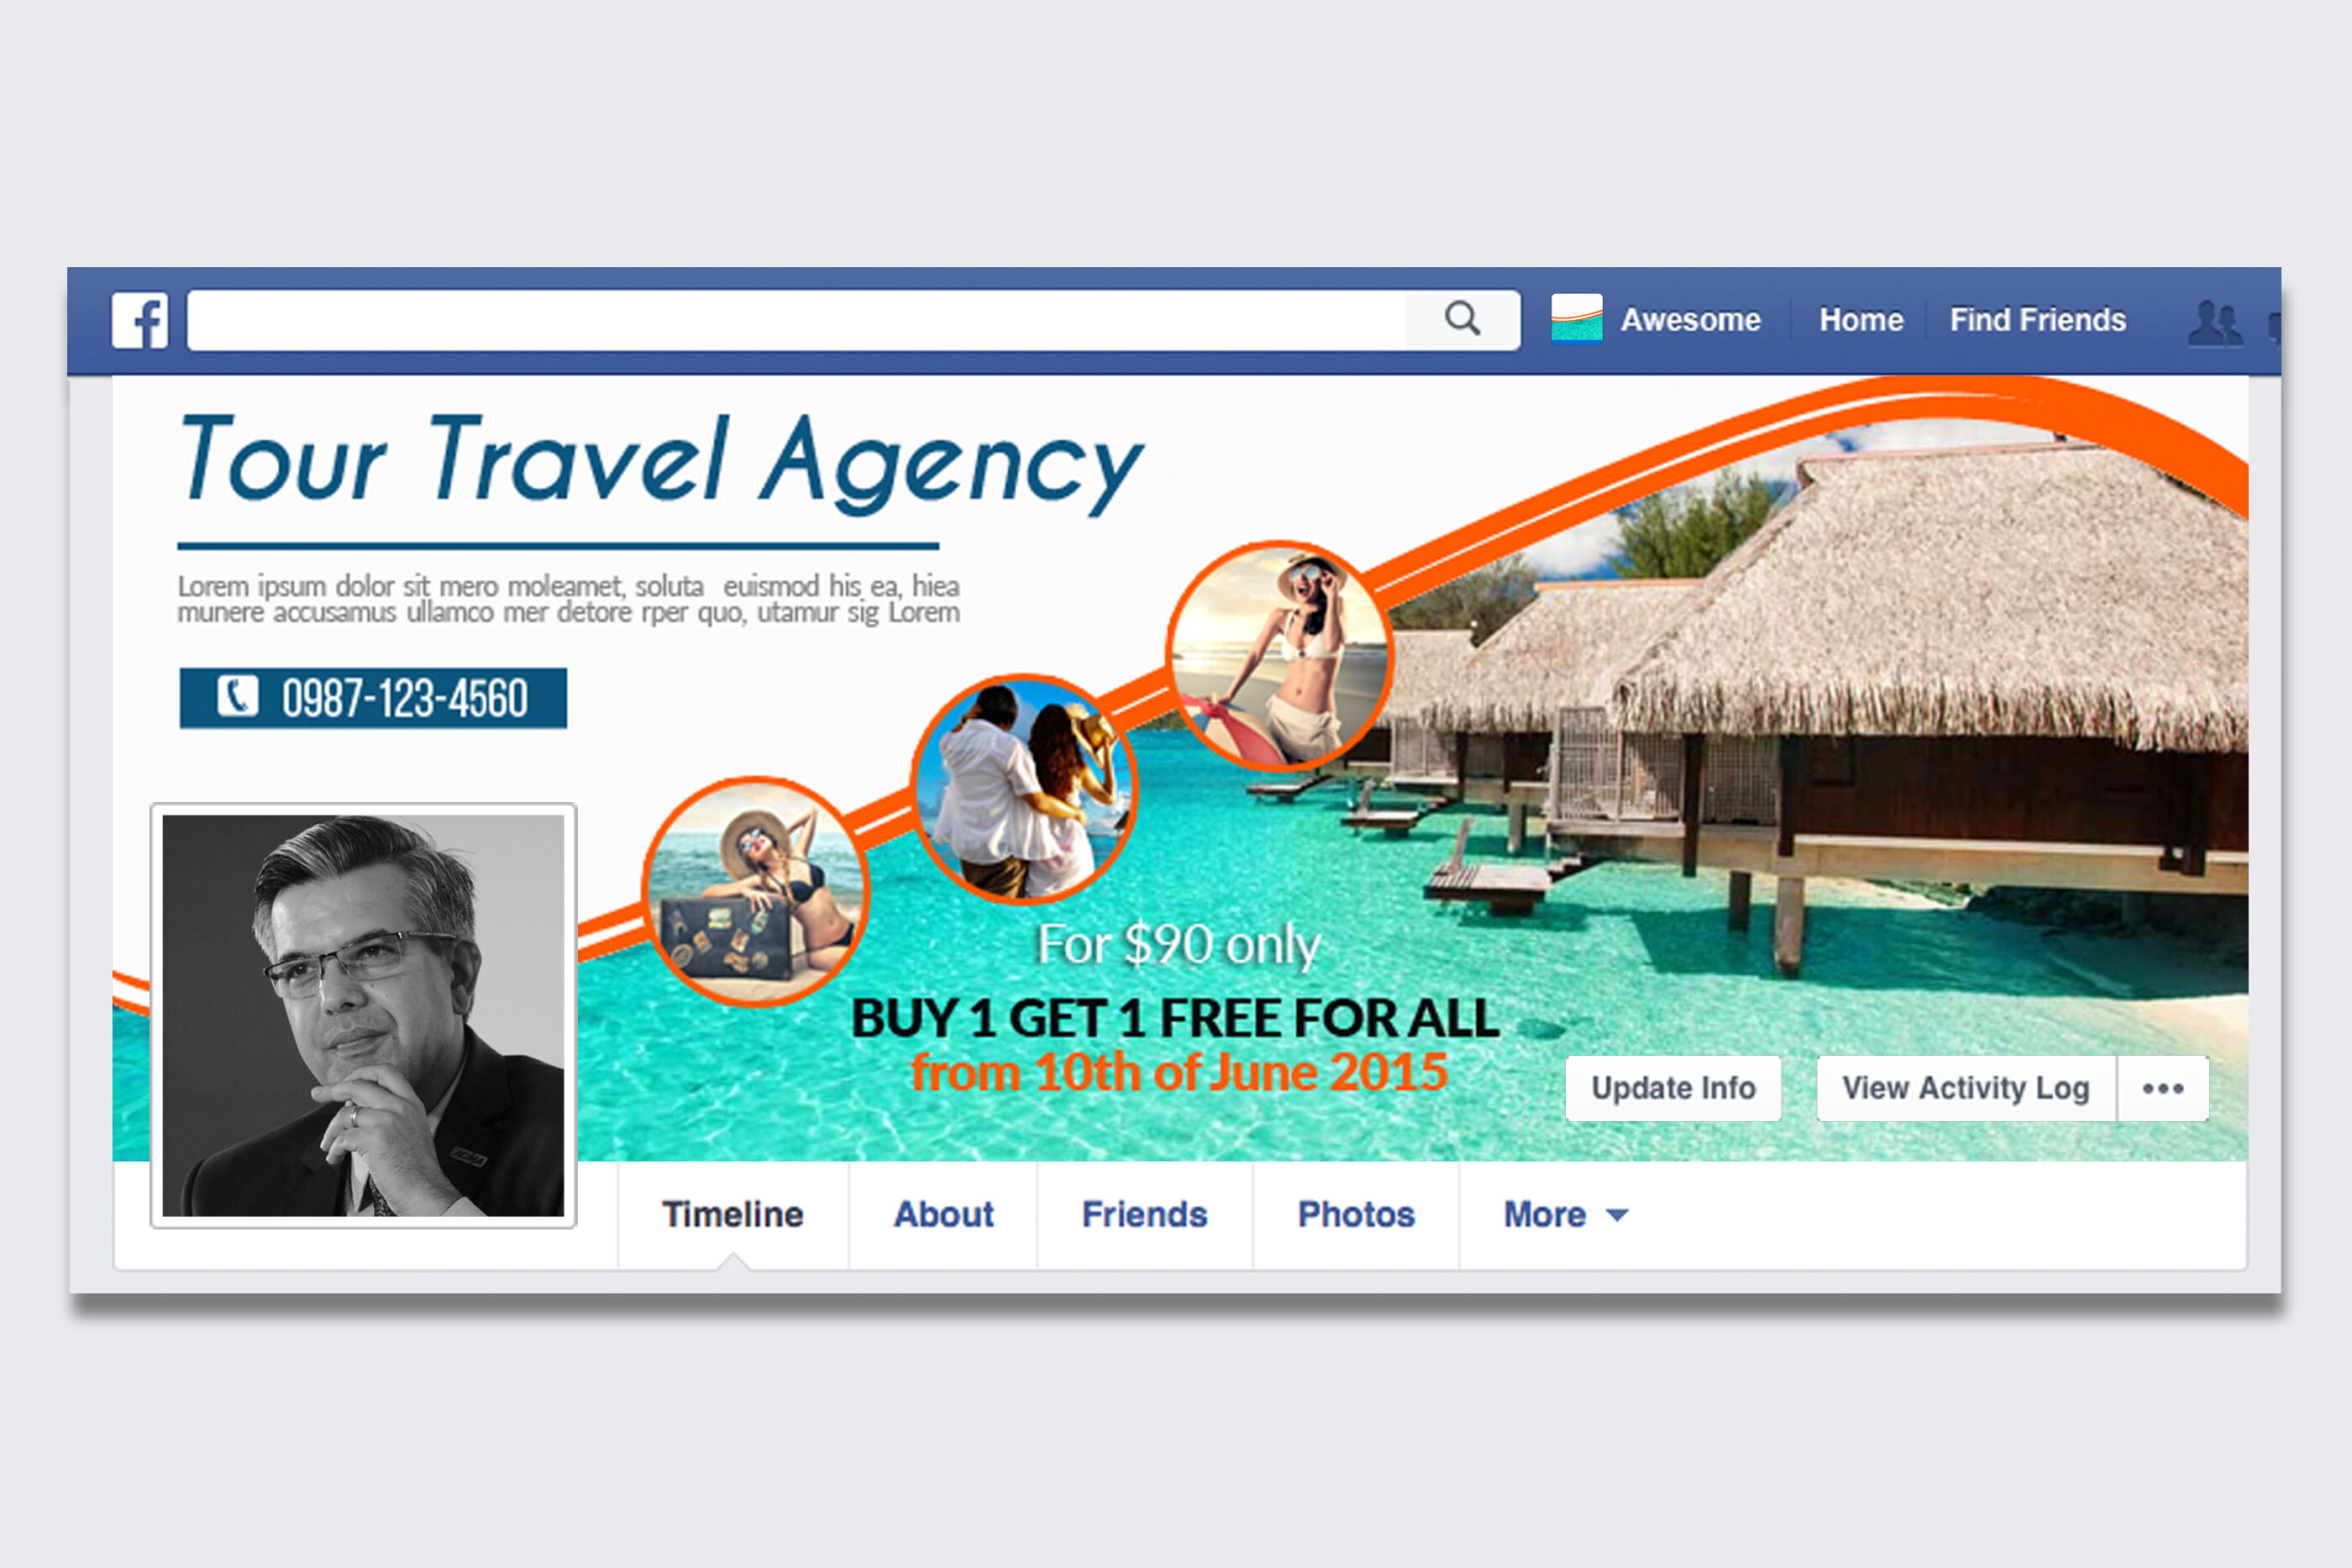 travel planners facebook